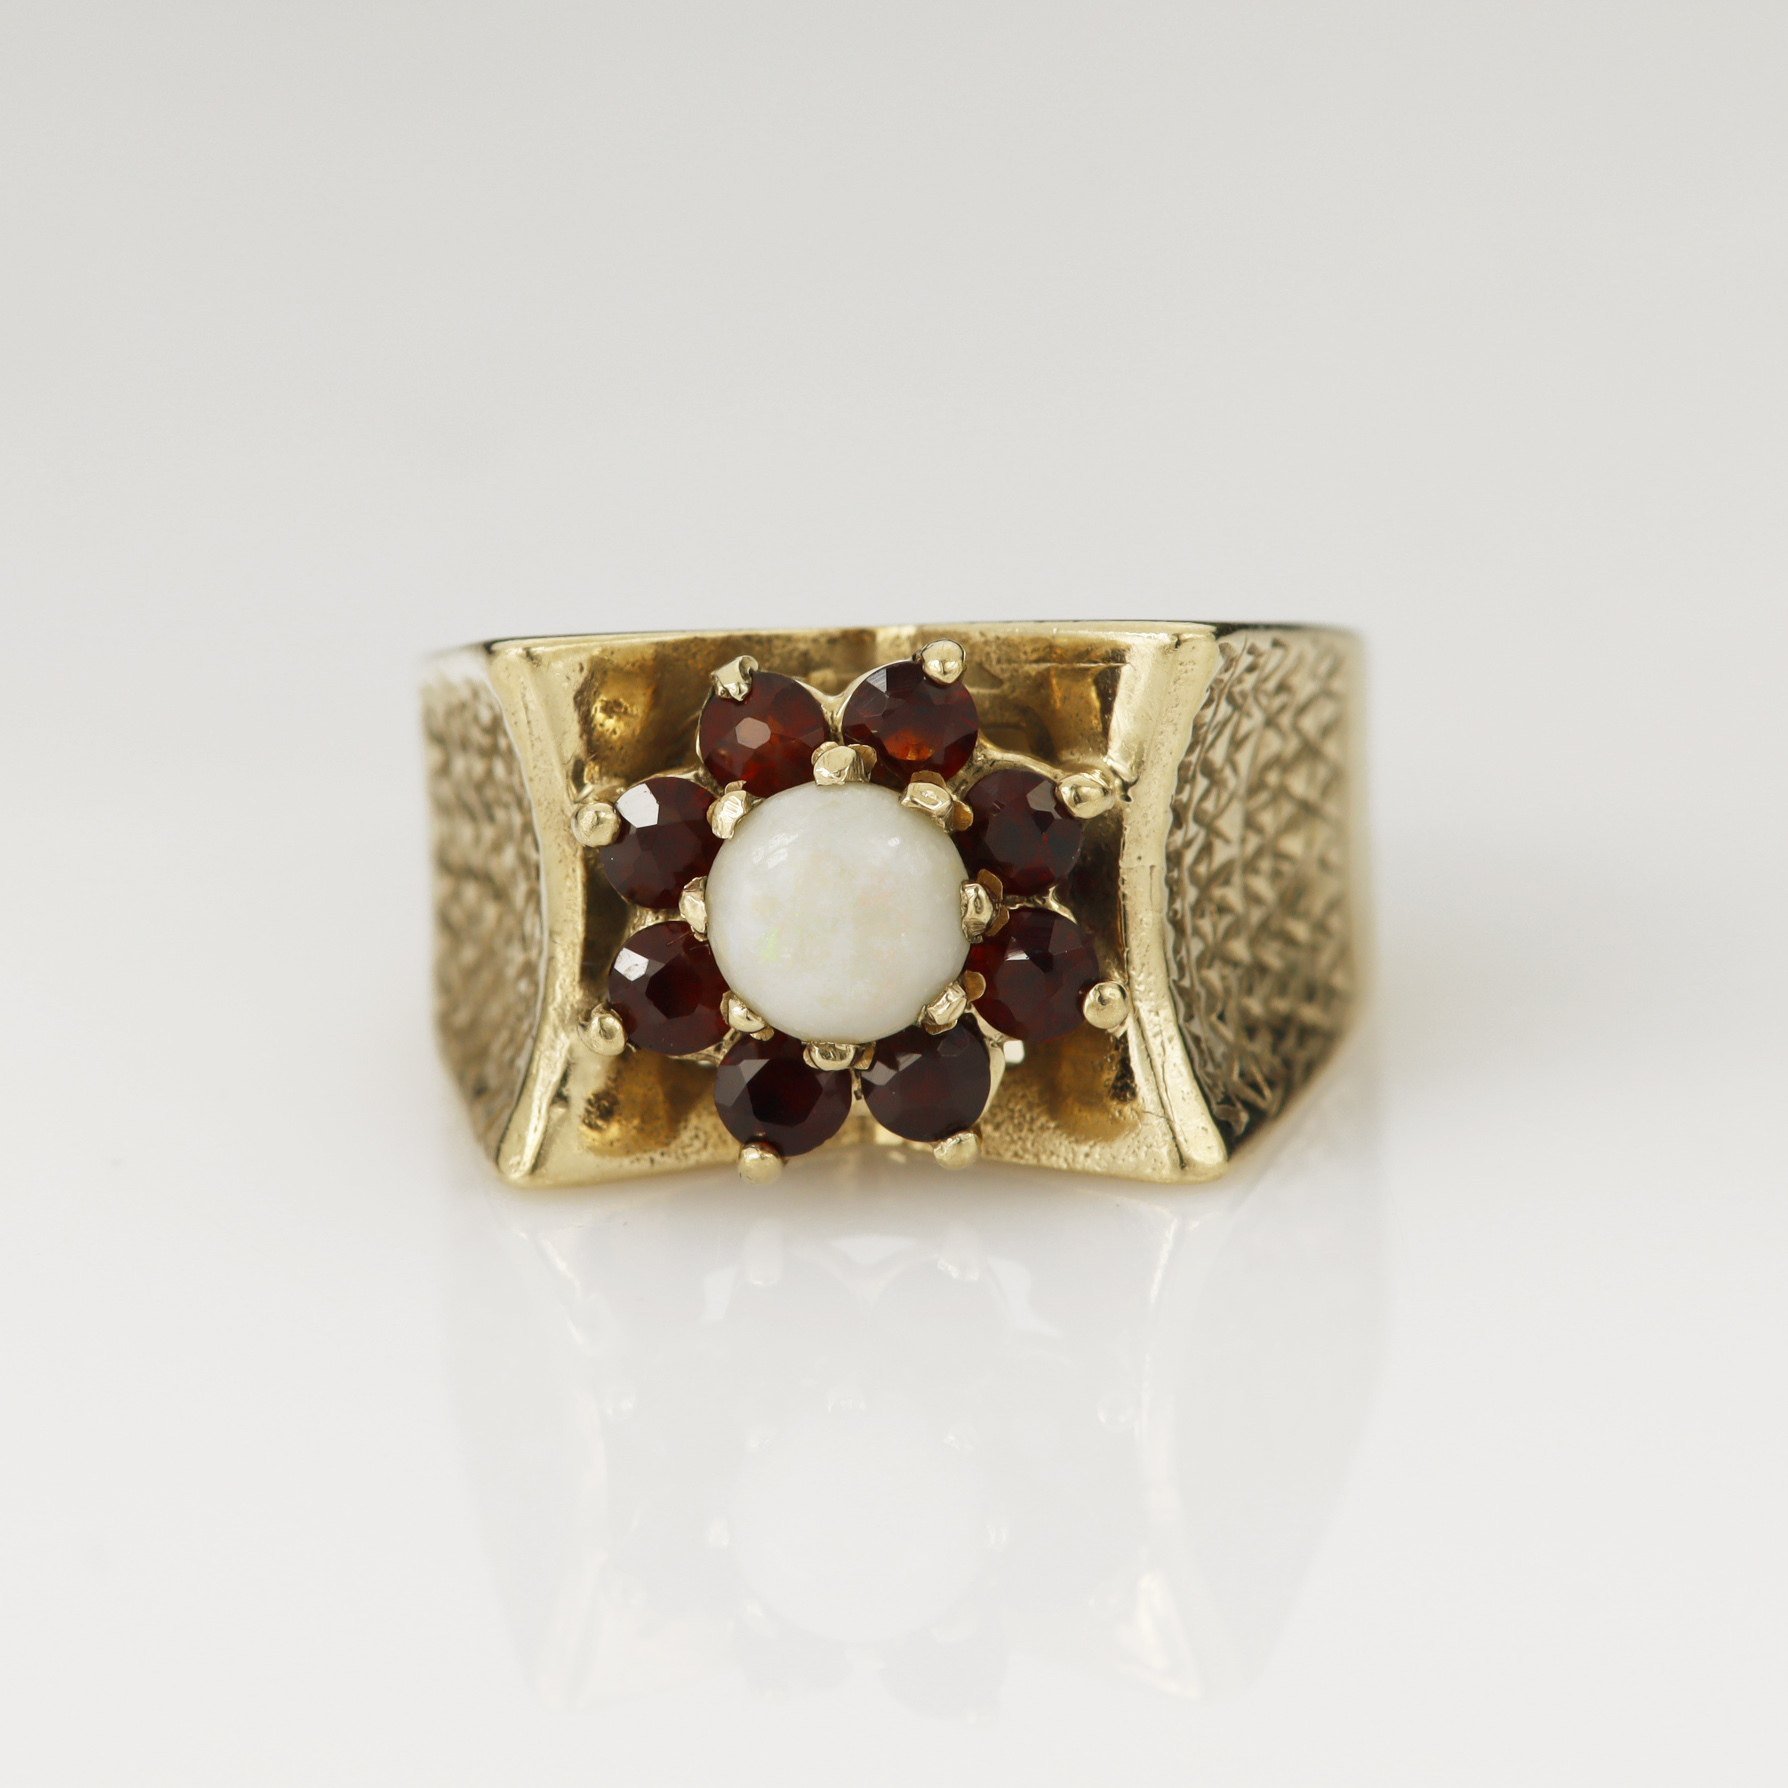 Yellow gold (tests 9ct) garnet and opal cluster ring, round cabochon opal measures 5mm, surrounded